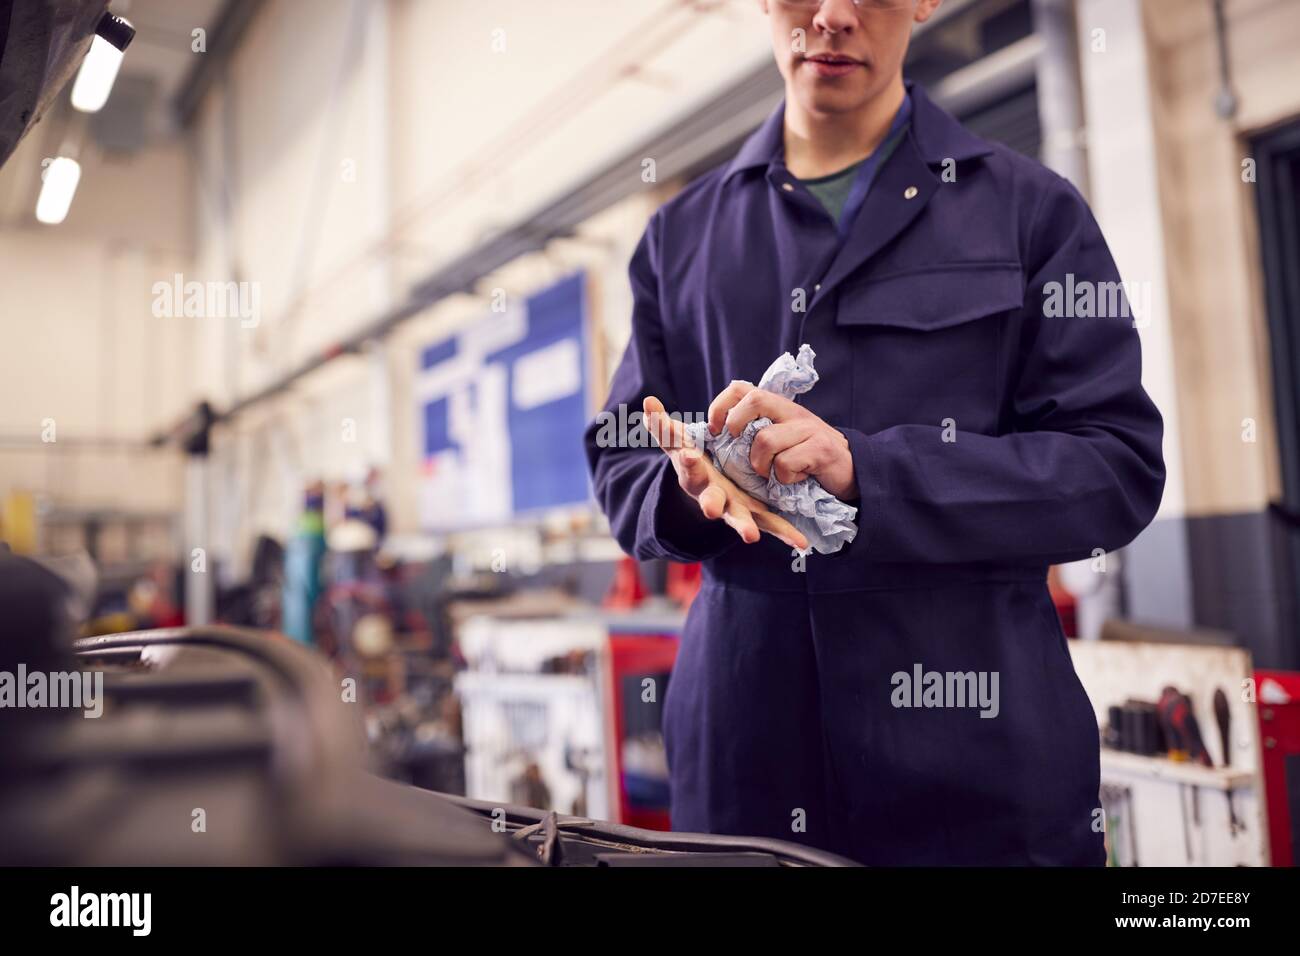 Close Up Of Male Motor Mechanic Wiping Hands After Working On Car Engine In Garage Stock Photo